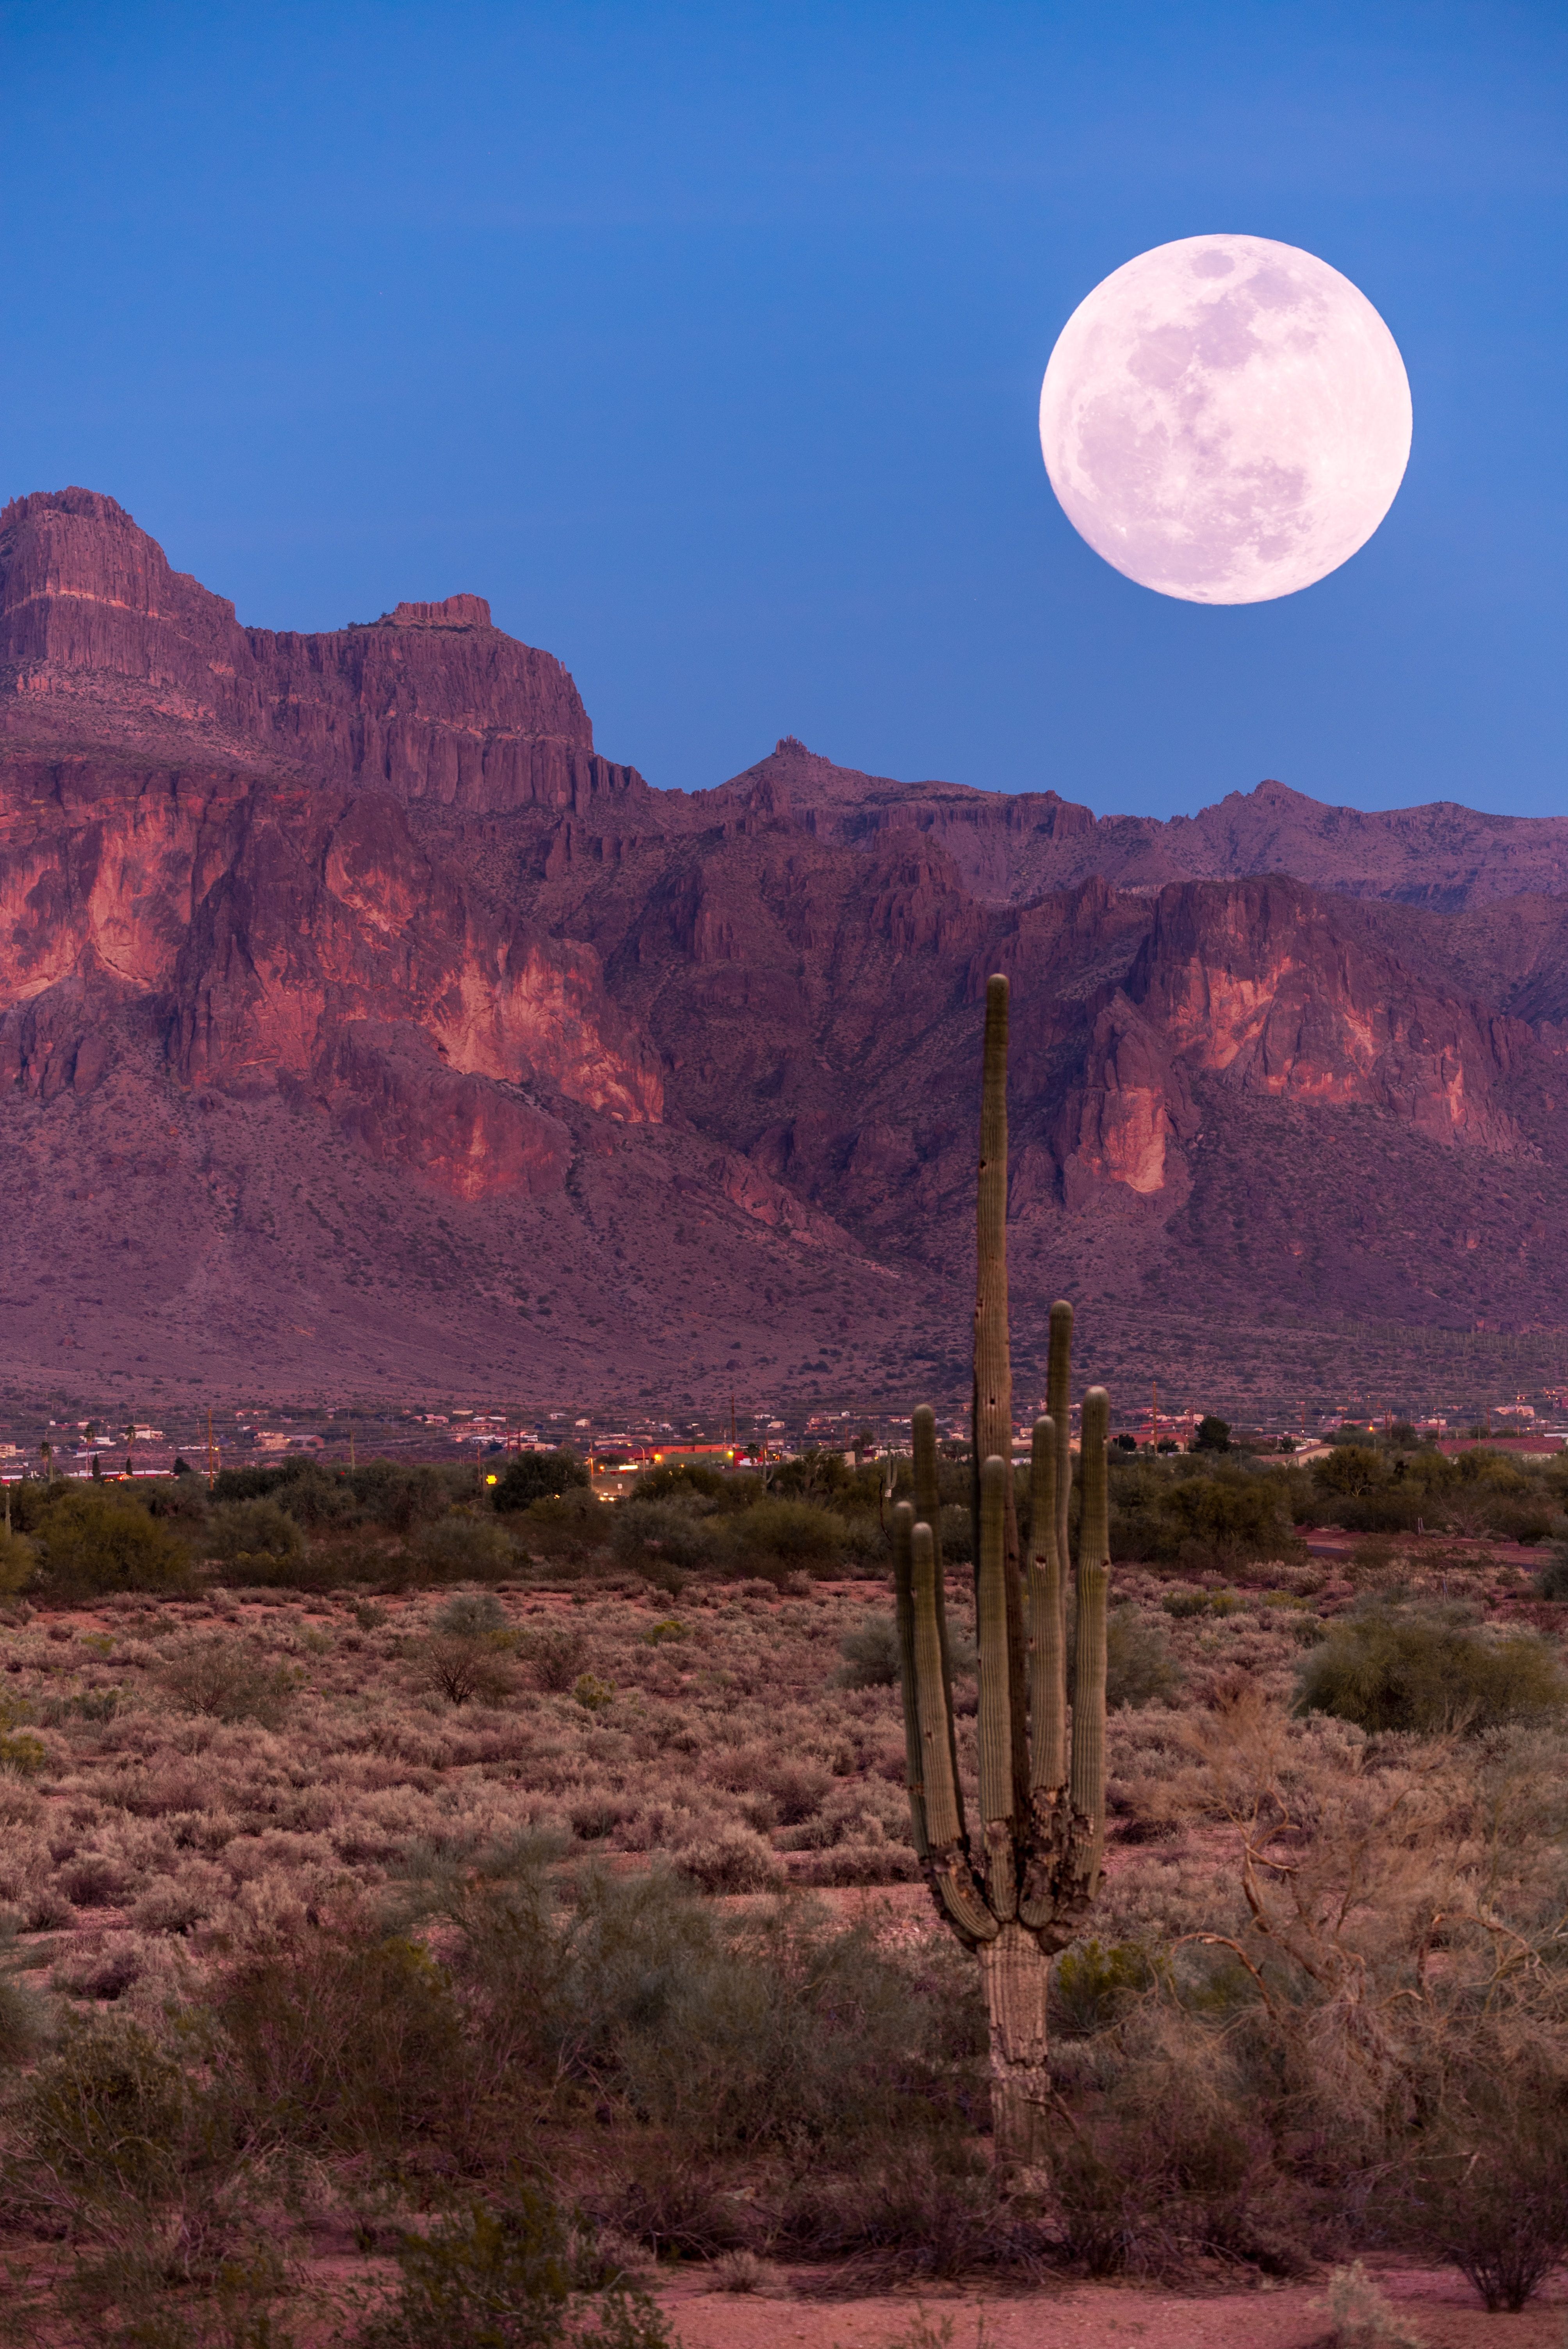 Full moon rising over a mountain desert and cactus